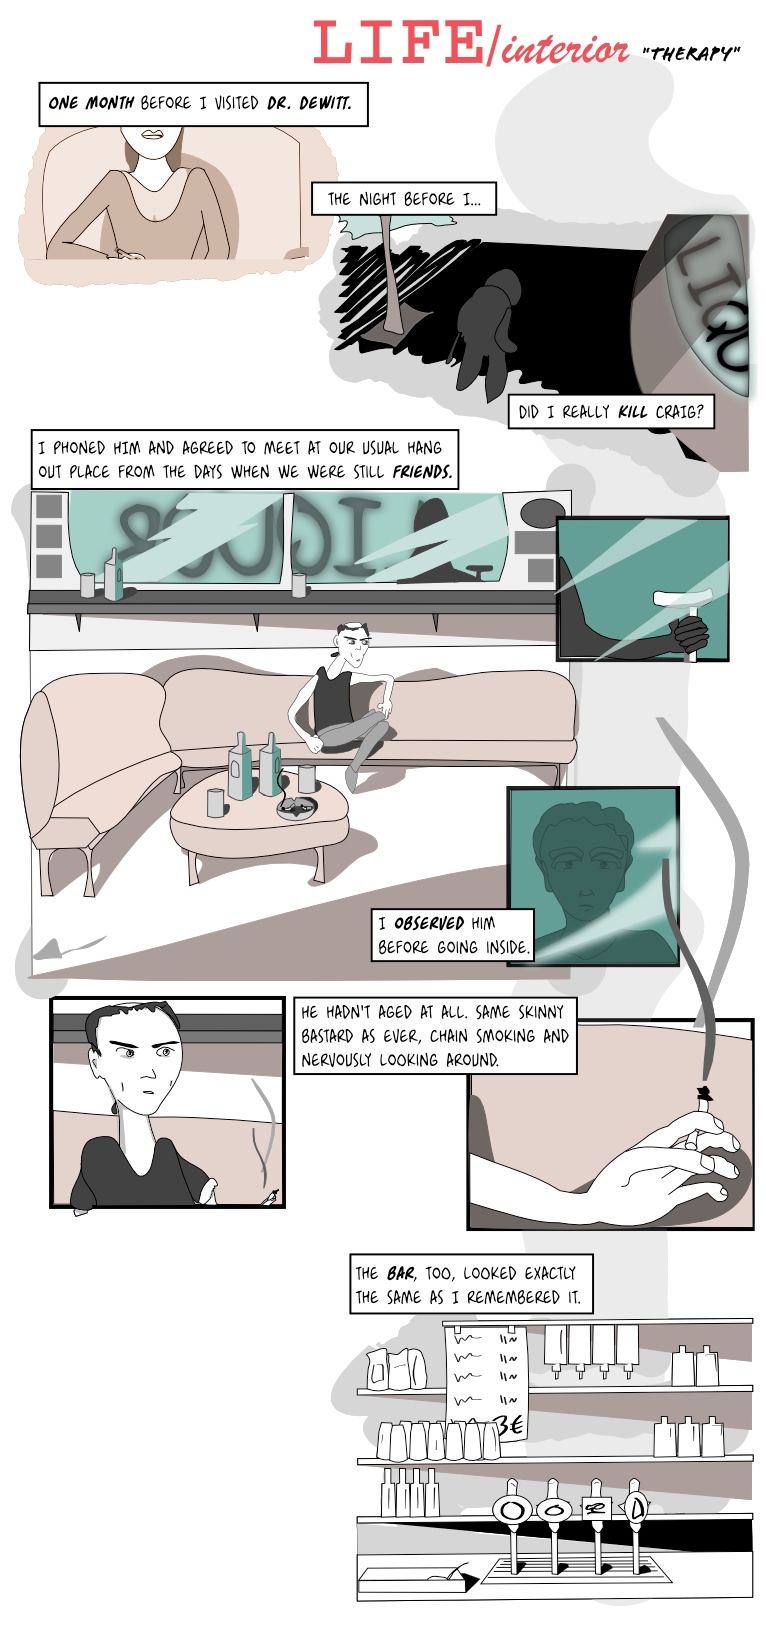 LIFE/interior: Therapy (8)